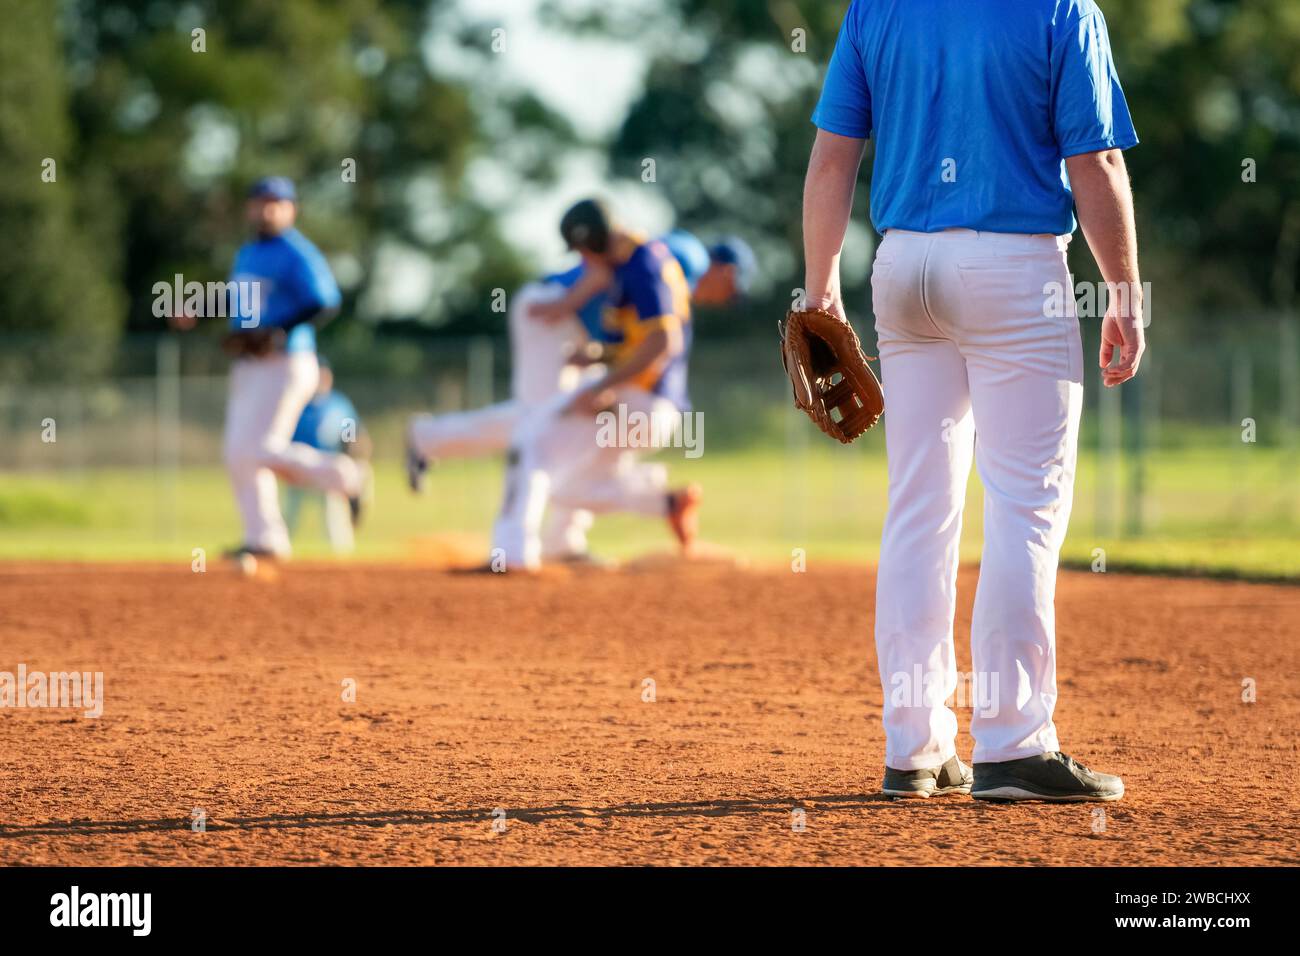 Baseball game, infielder on the third base is watching the close play on the first base during the baseball game Stock Photo